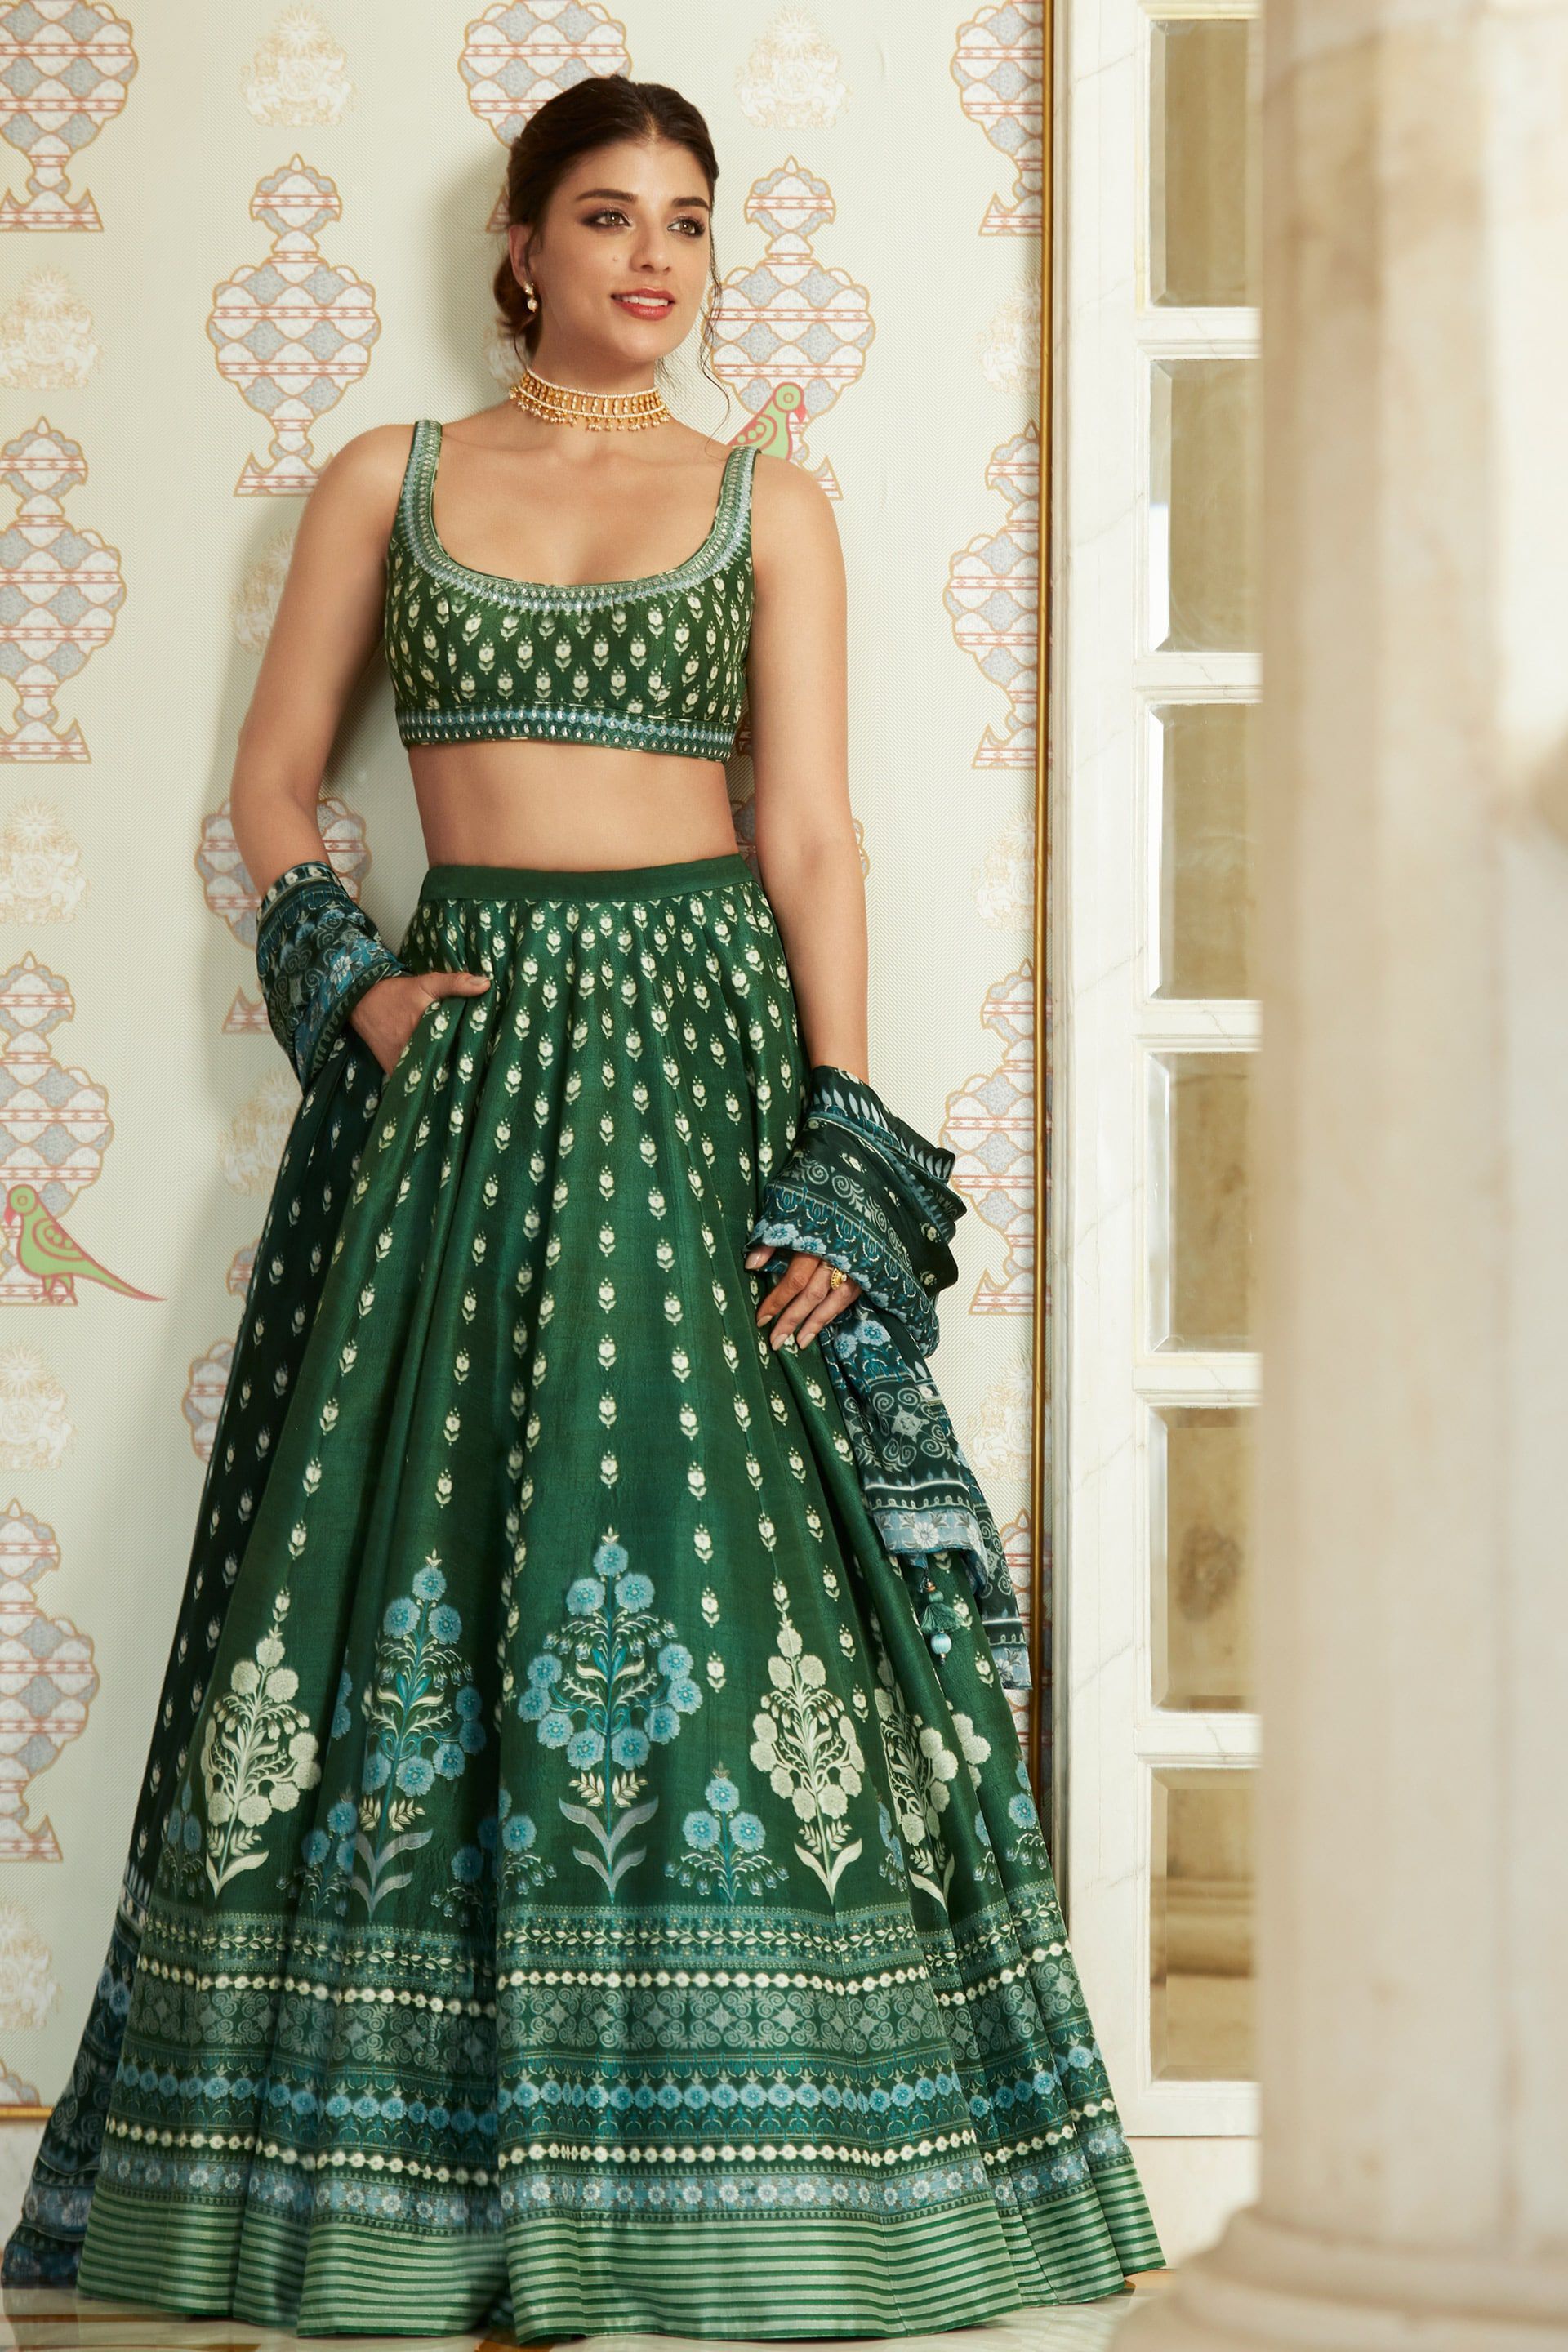 Stunning Bridal Lehengas Of 2021 That We Absolutely Loved – Site Title